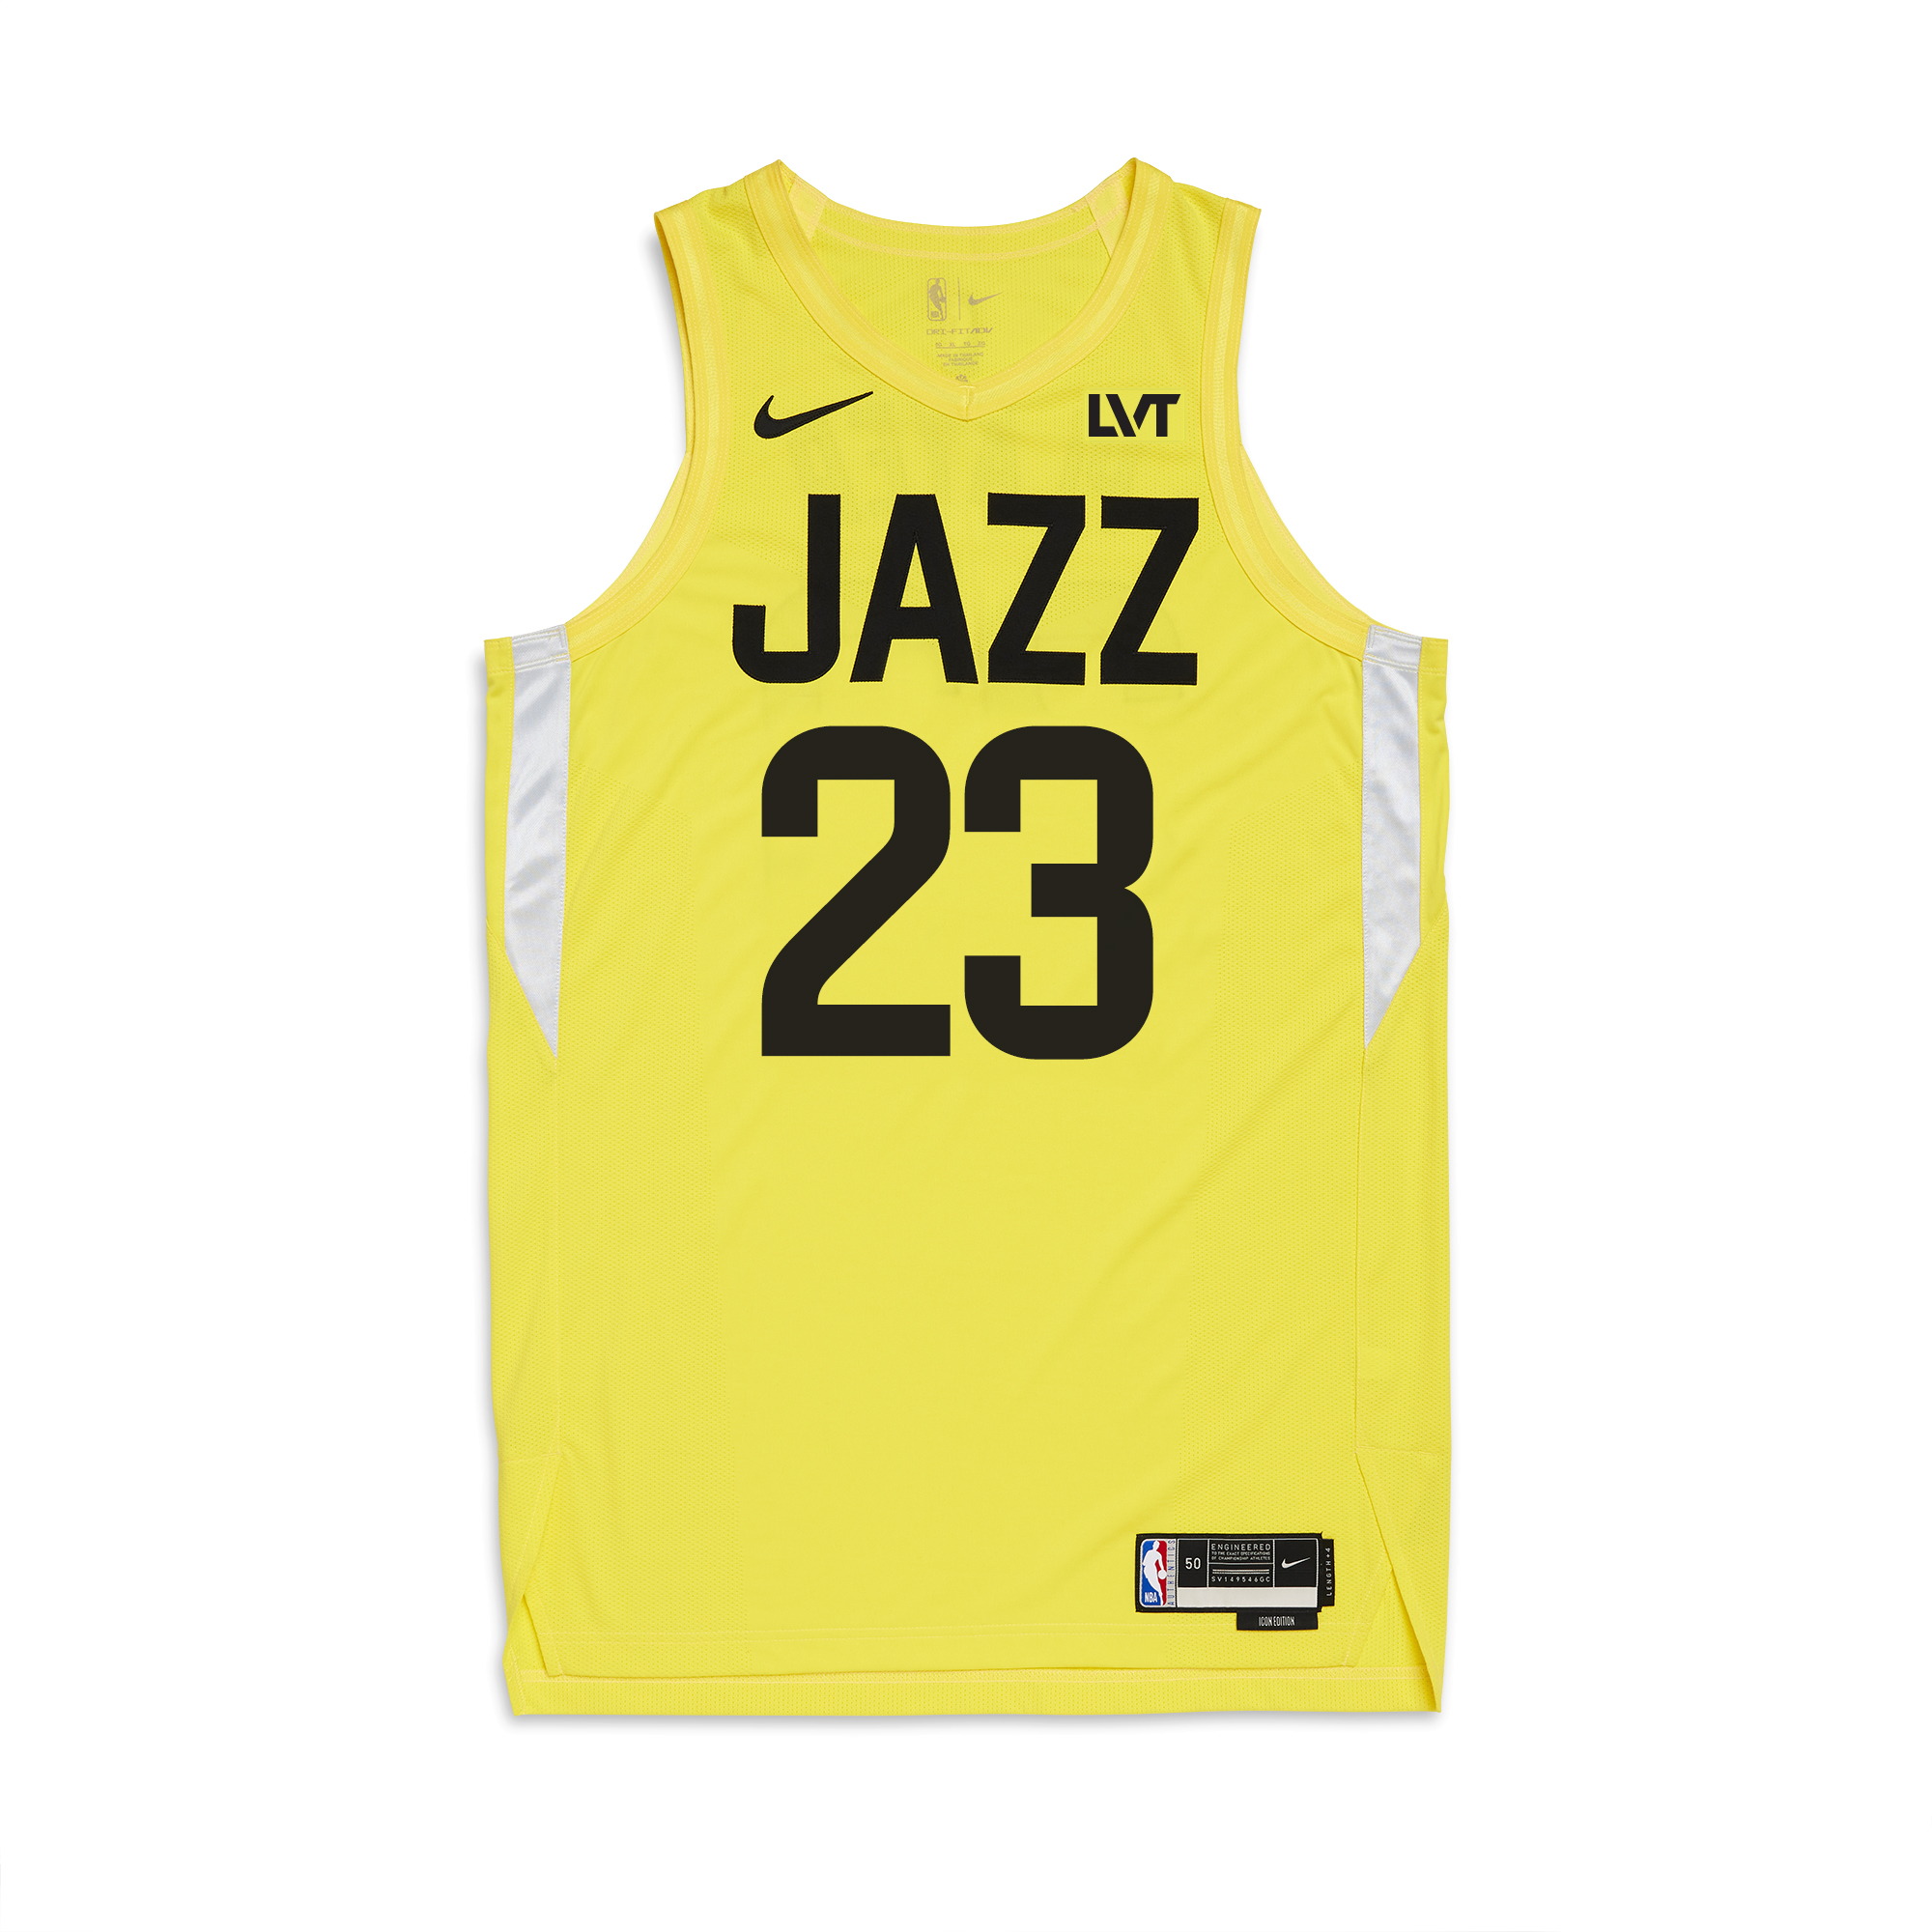 Leaked: Los Angeles Lakers New City Edition Uniform for 2023-24